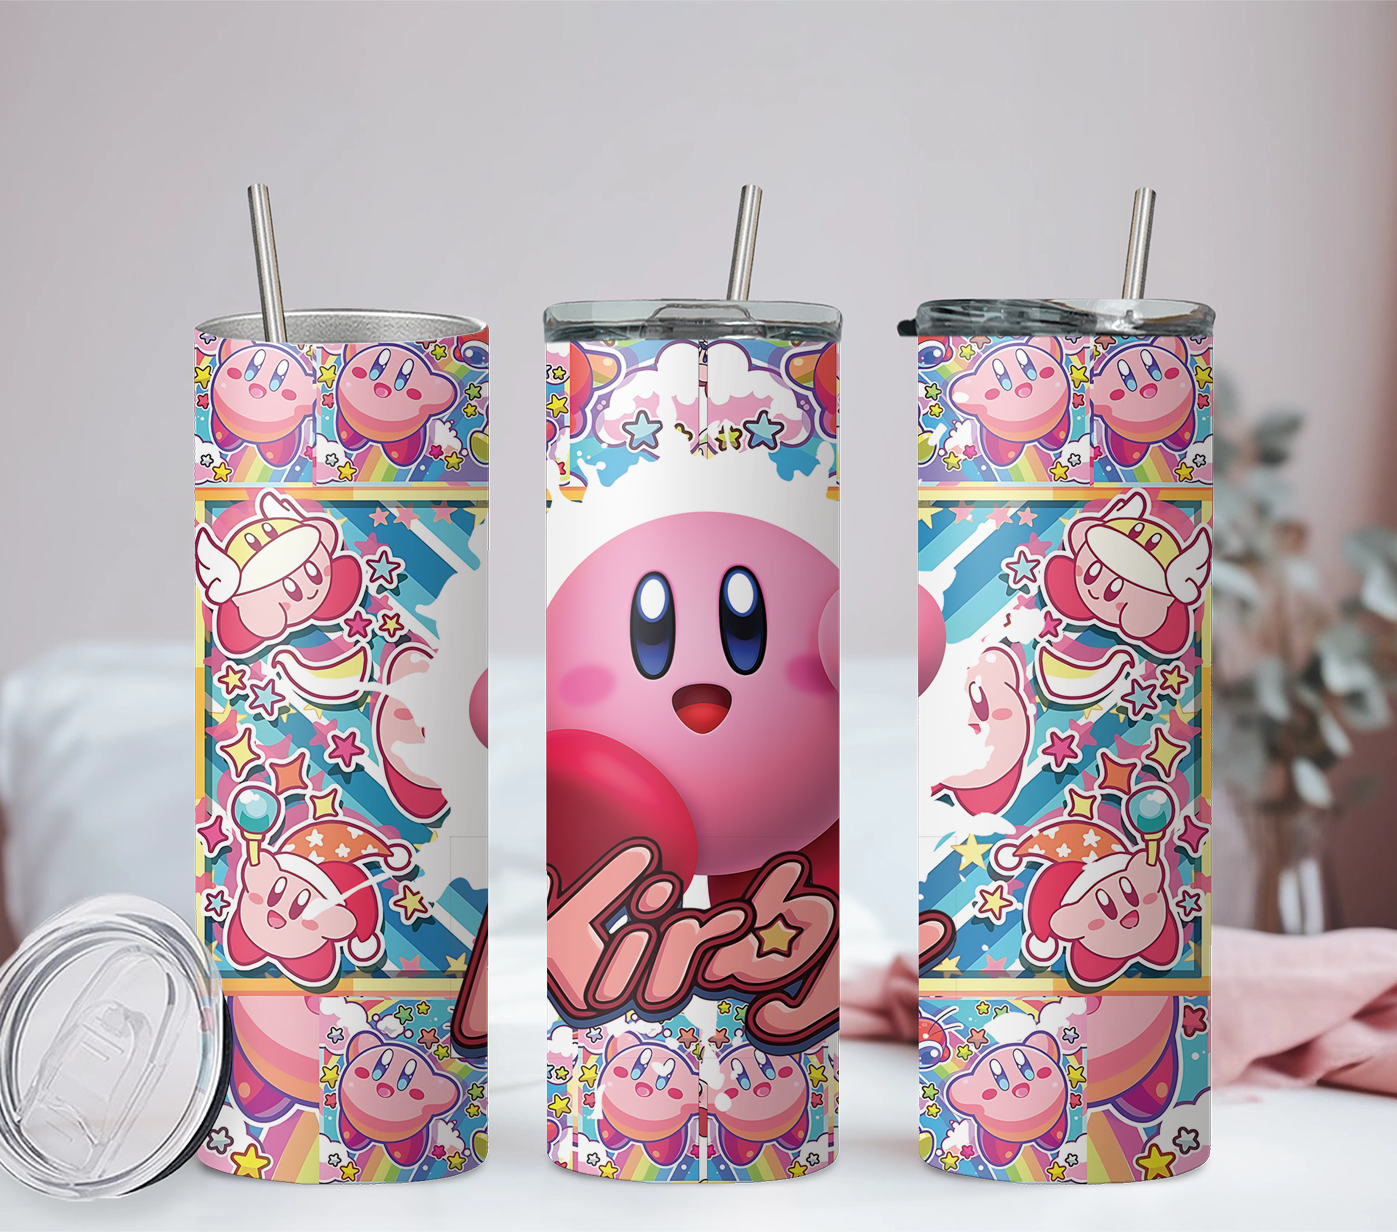 Kirby Anime 20oz Tumbler with Straw and Lid